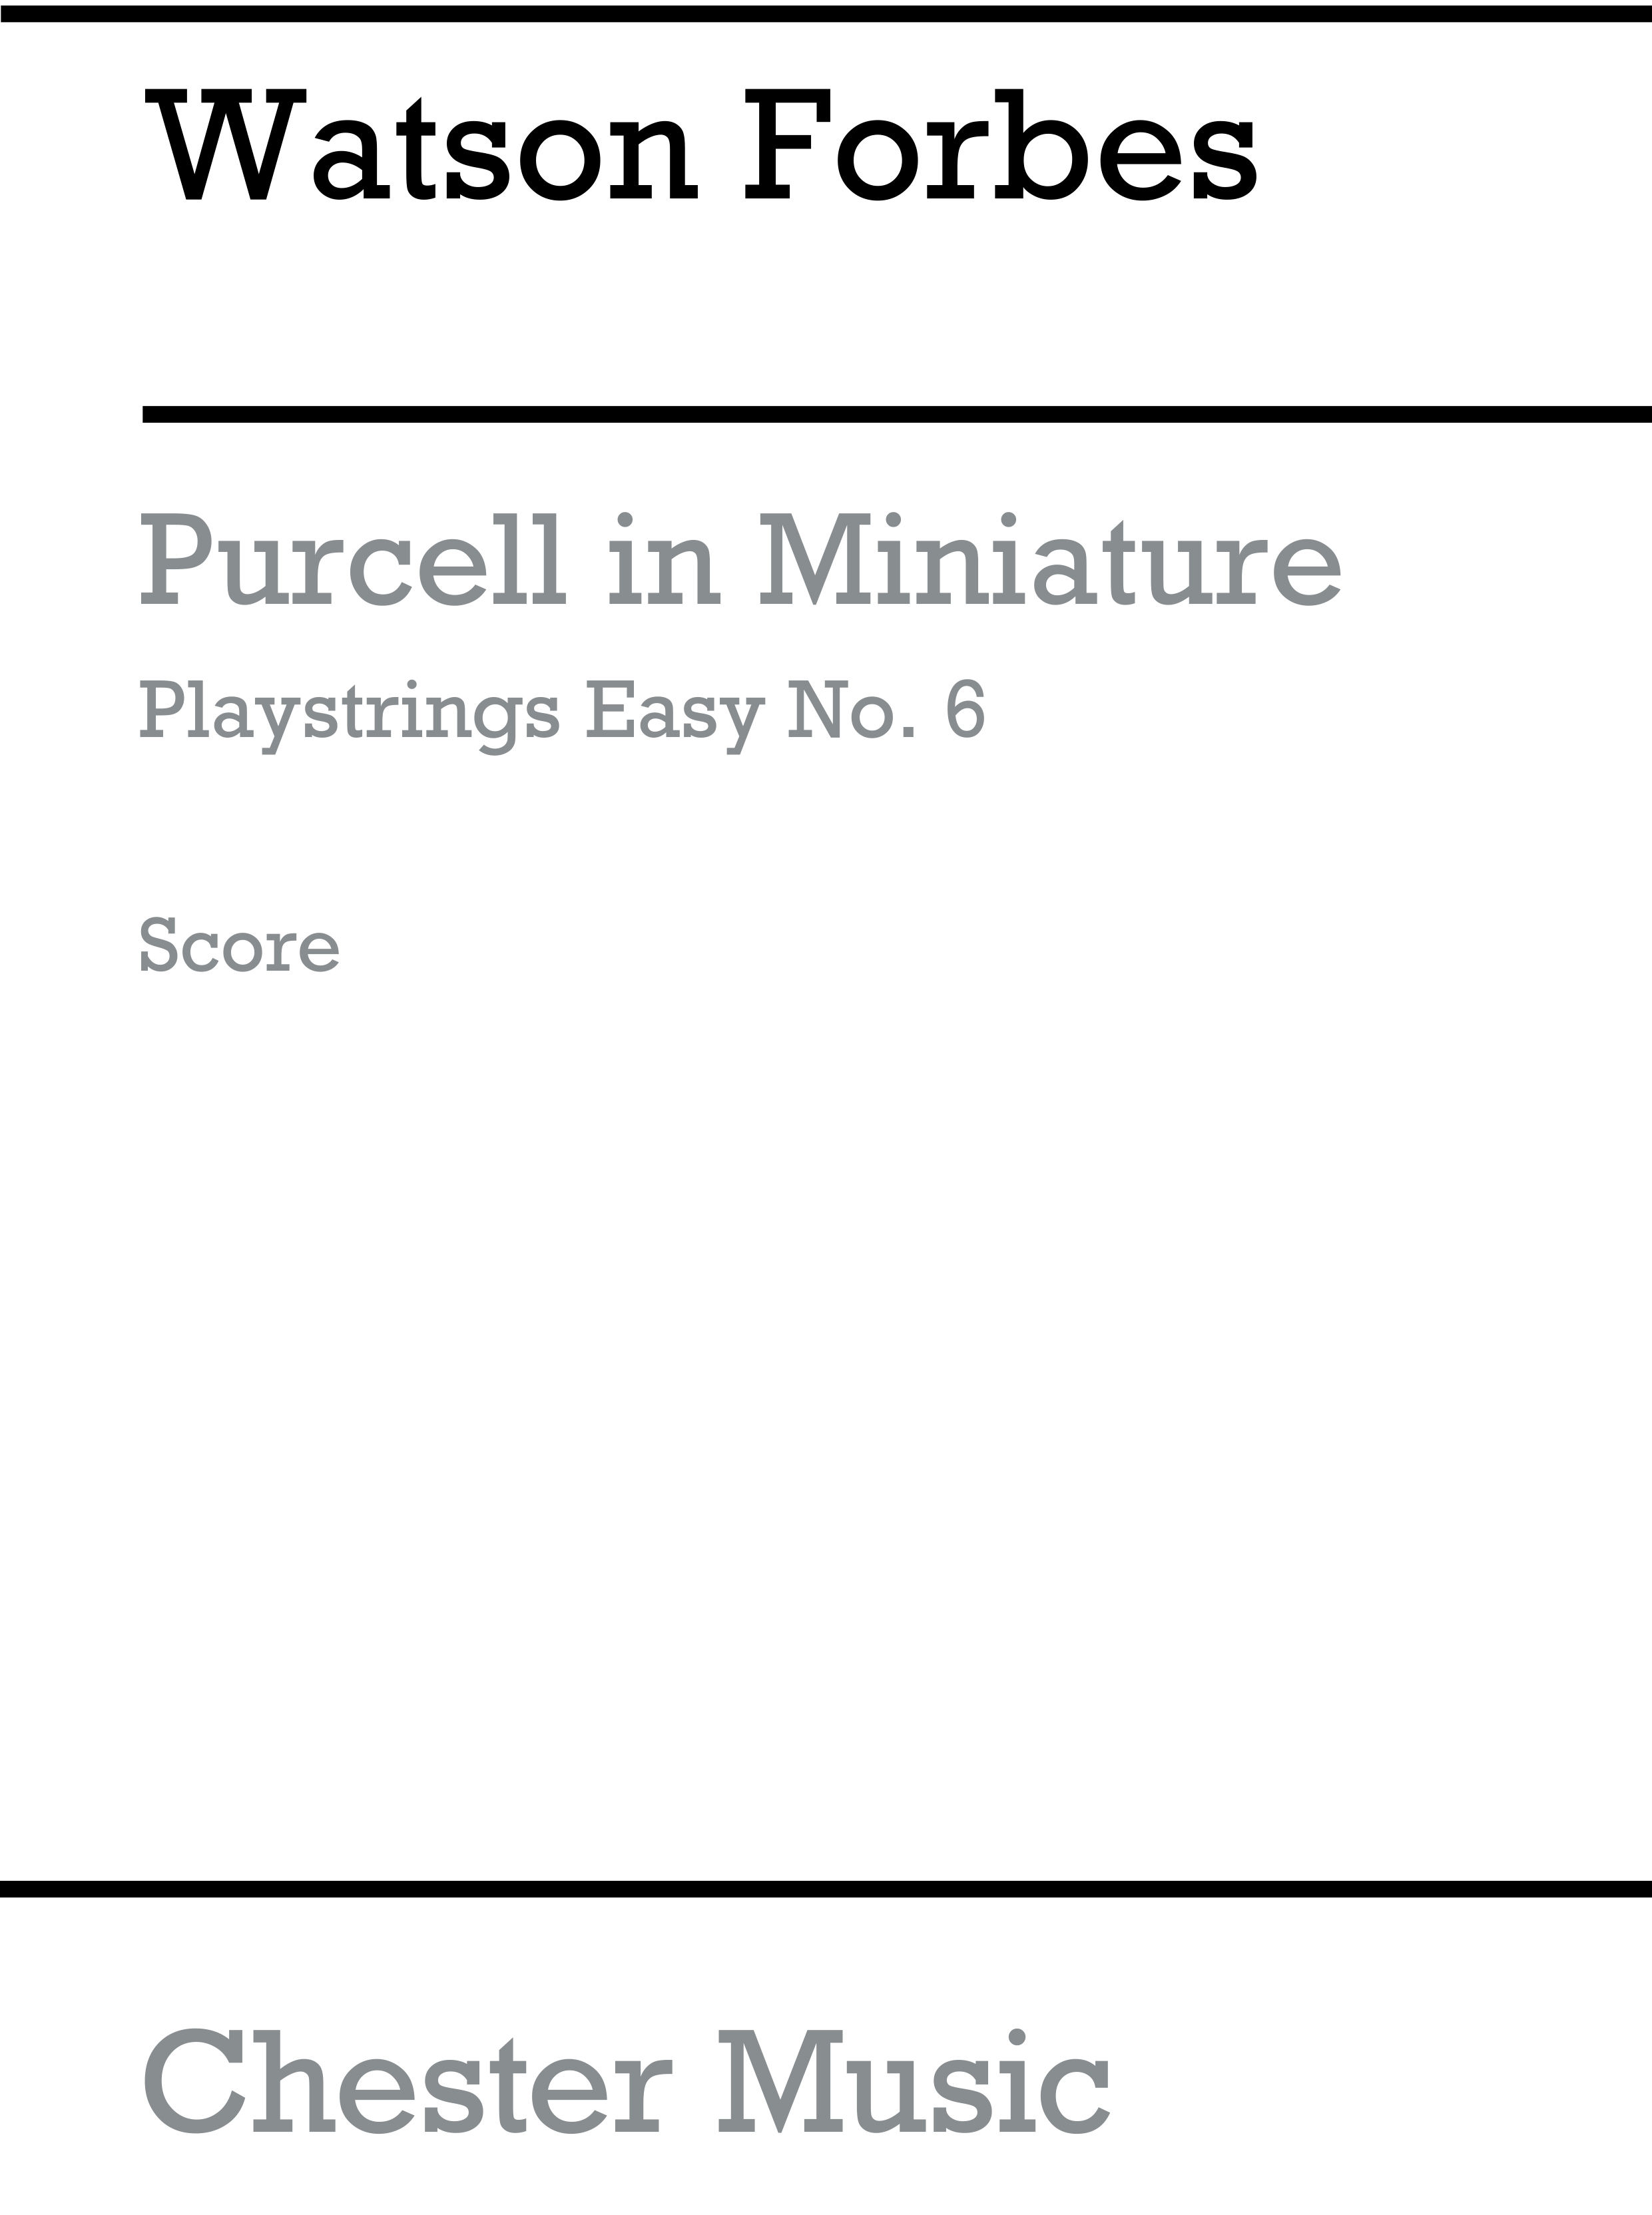 Henry Purcell: Playstrings Easy No. 6 Purcell In Miniature: Orchestra: Score